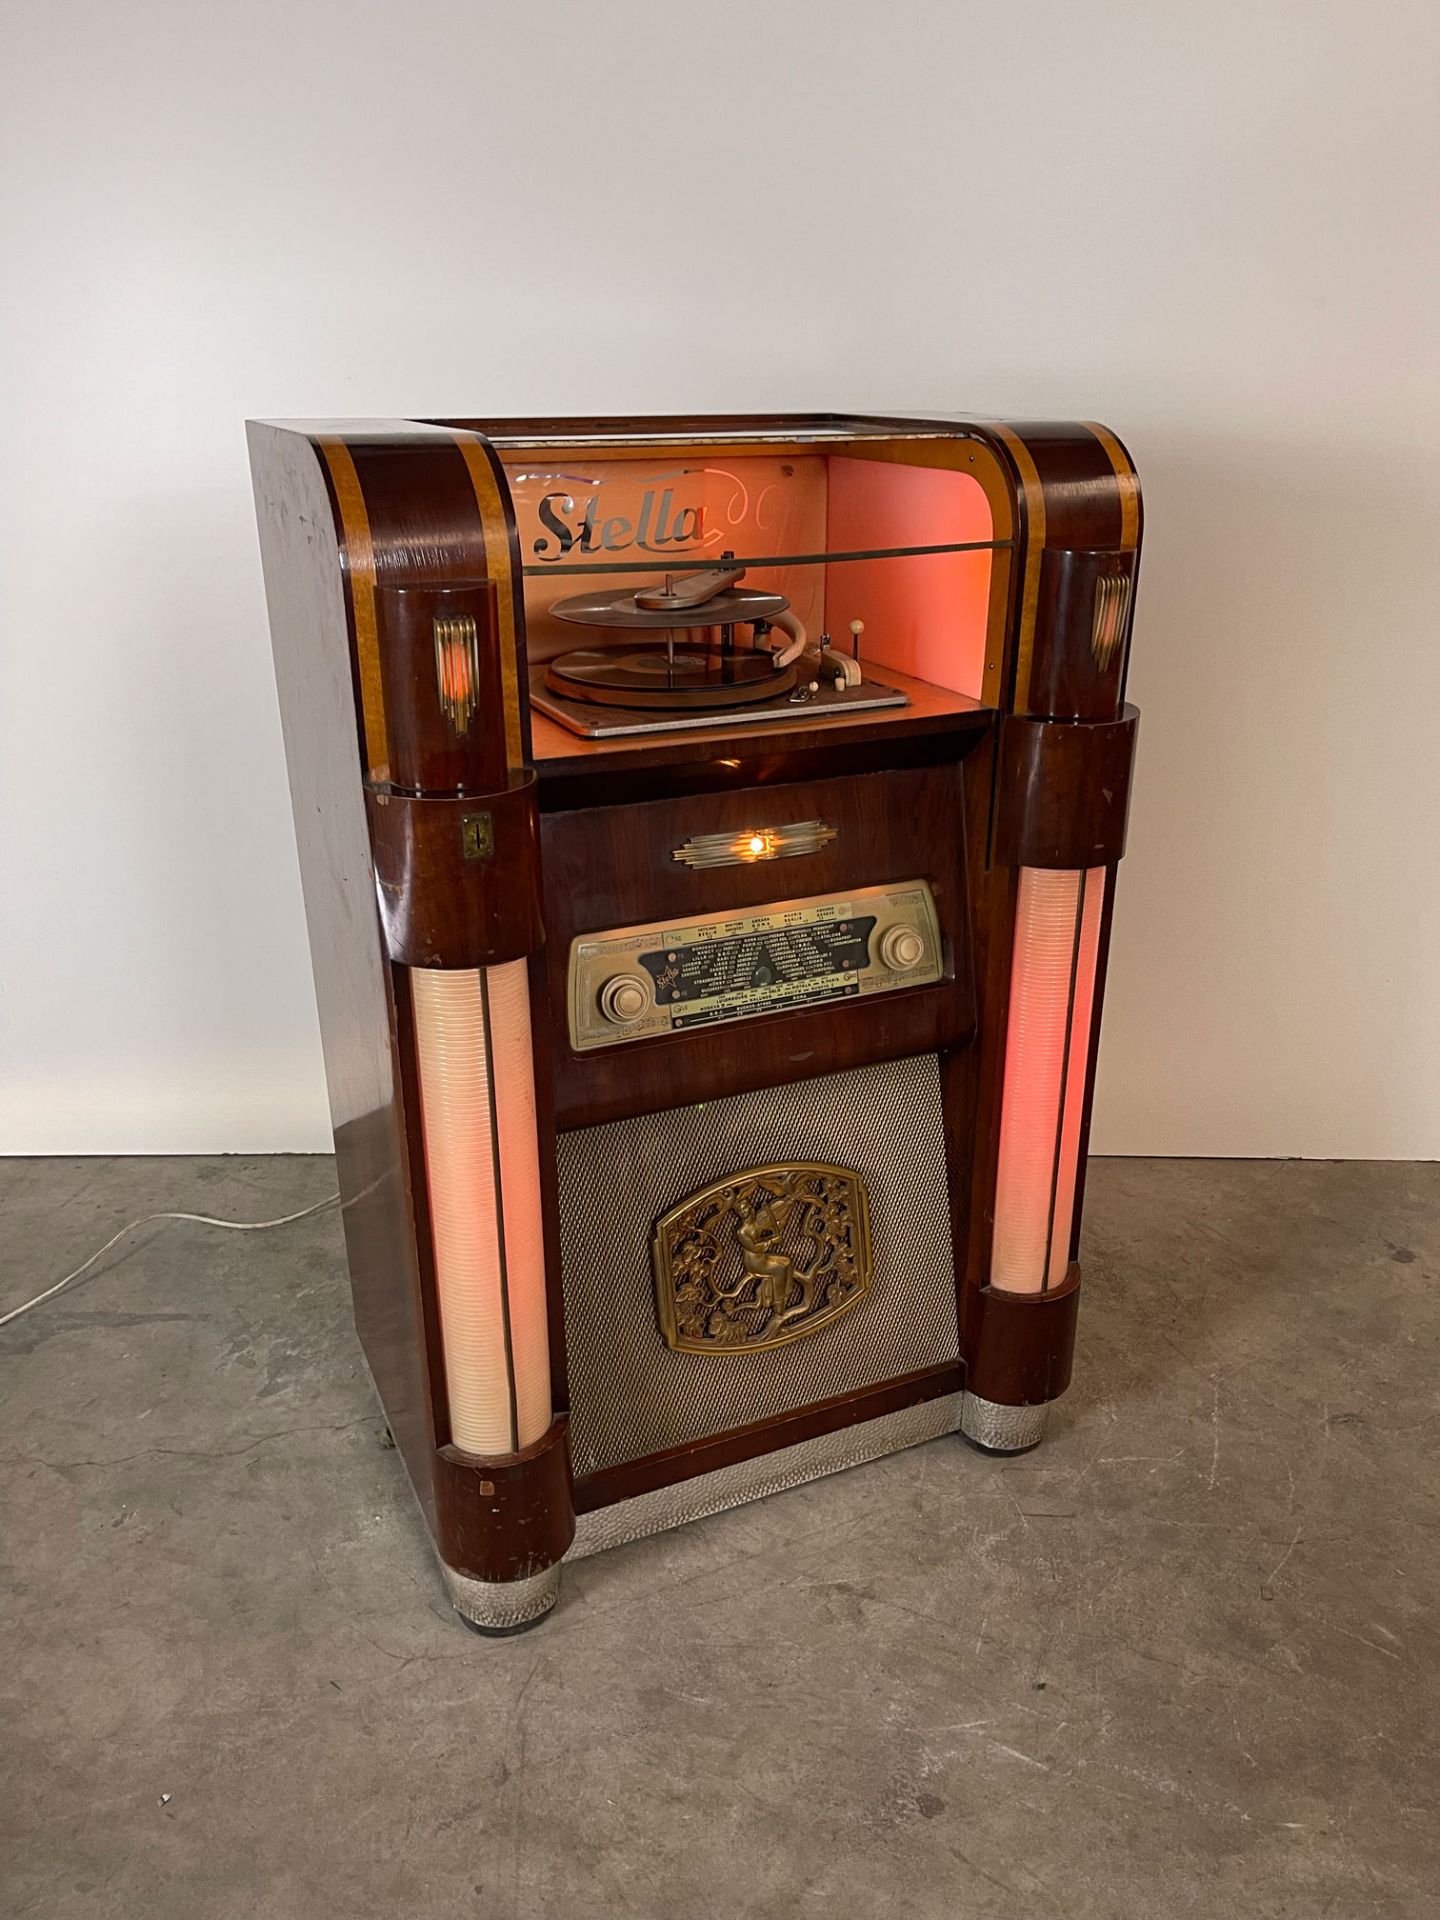 1954 Belgian Stella 531 Coin-Op Record Player with Built-In Radio - Image 3 of 15